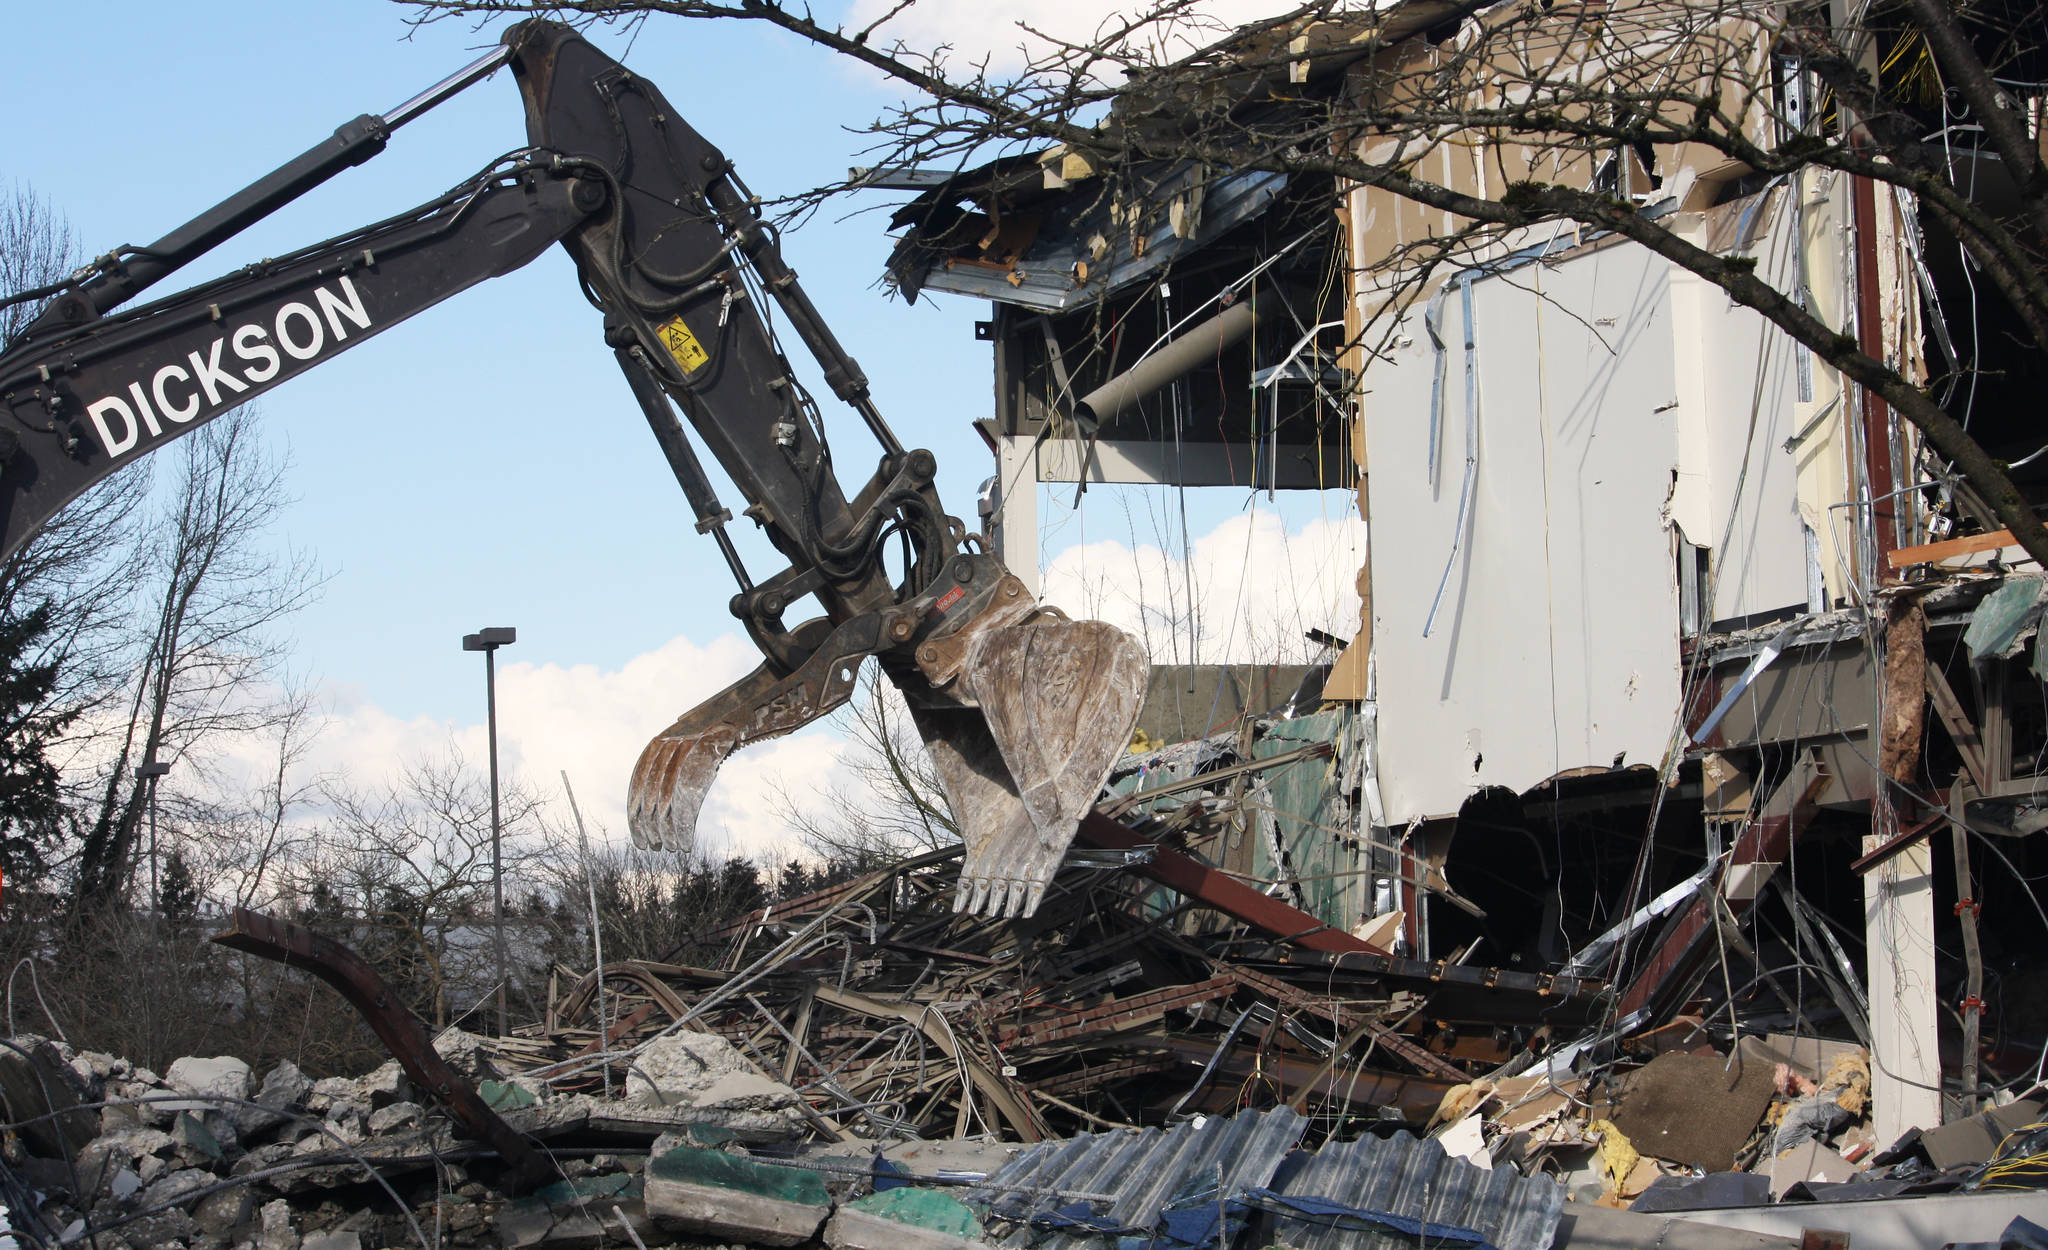 Crews began this week demolishing the former REI headquarters in Kent, 6750 S. 228th St. Two warehouses will replace the former office buildings. STEVE HUNTER, Kent Reporter